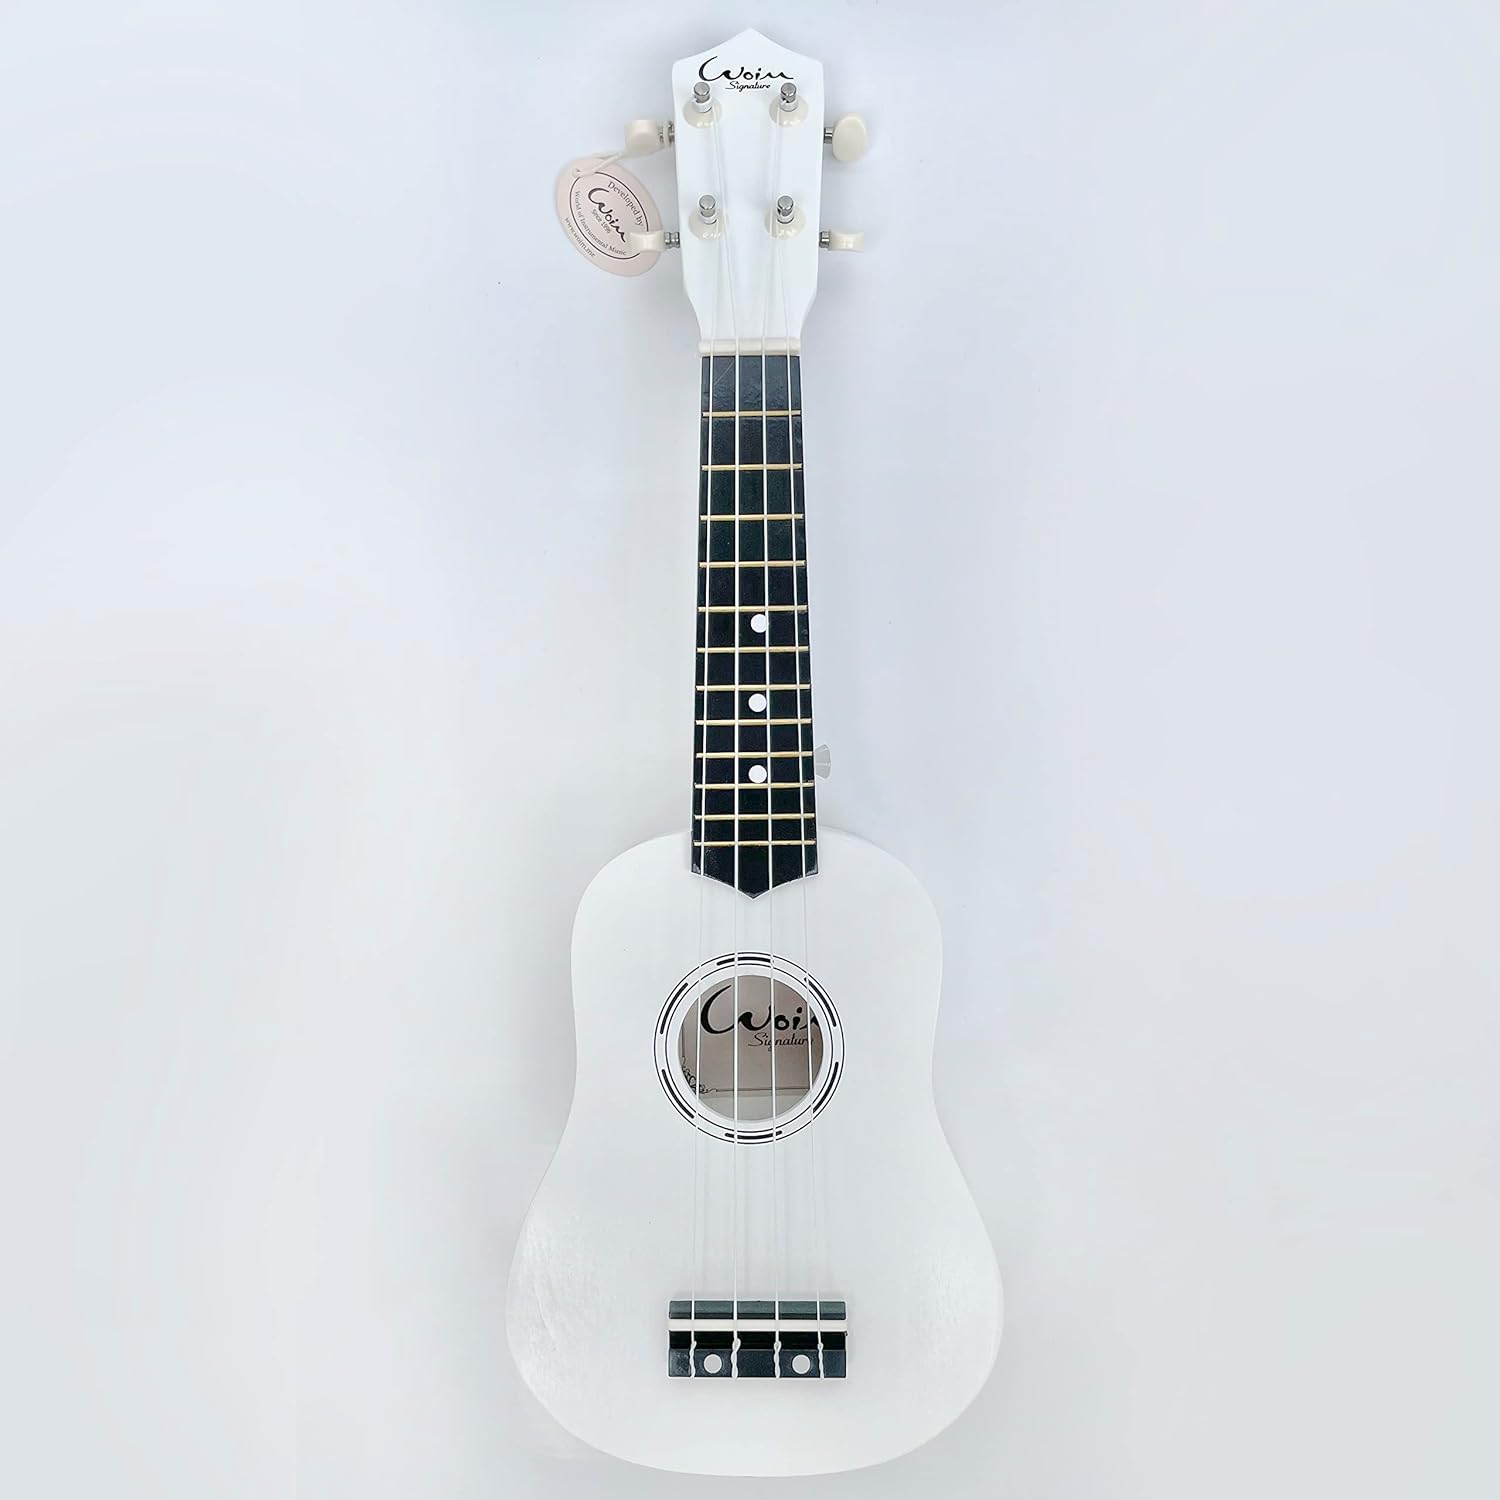 Woim Soprano 21 Inch Ukulele For Beginner with Free Pick, Cover Bag and One By One Video Call Tutorial Sesson (White)